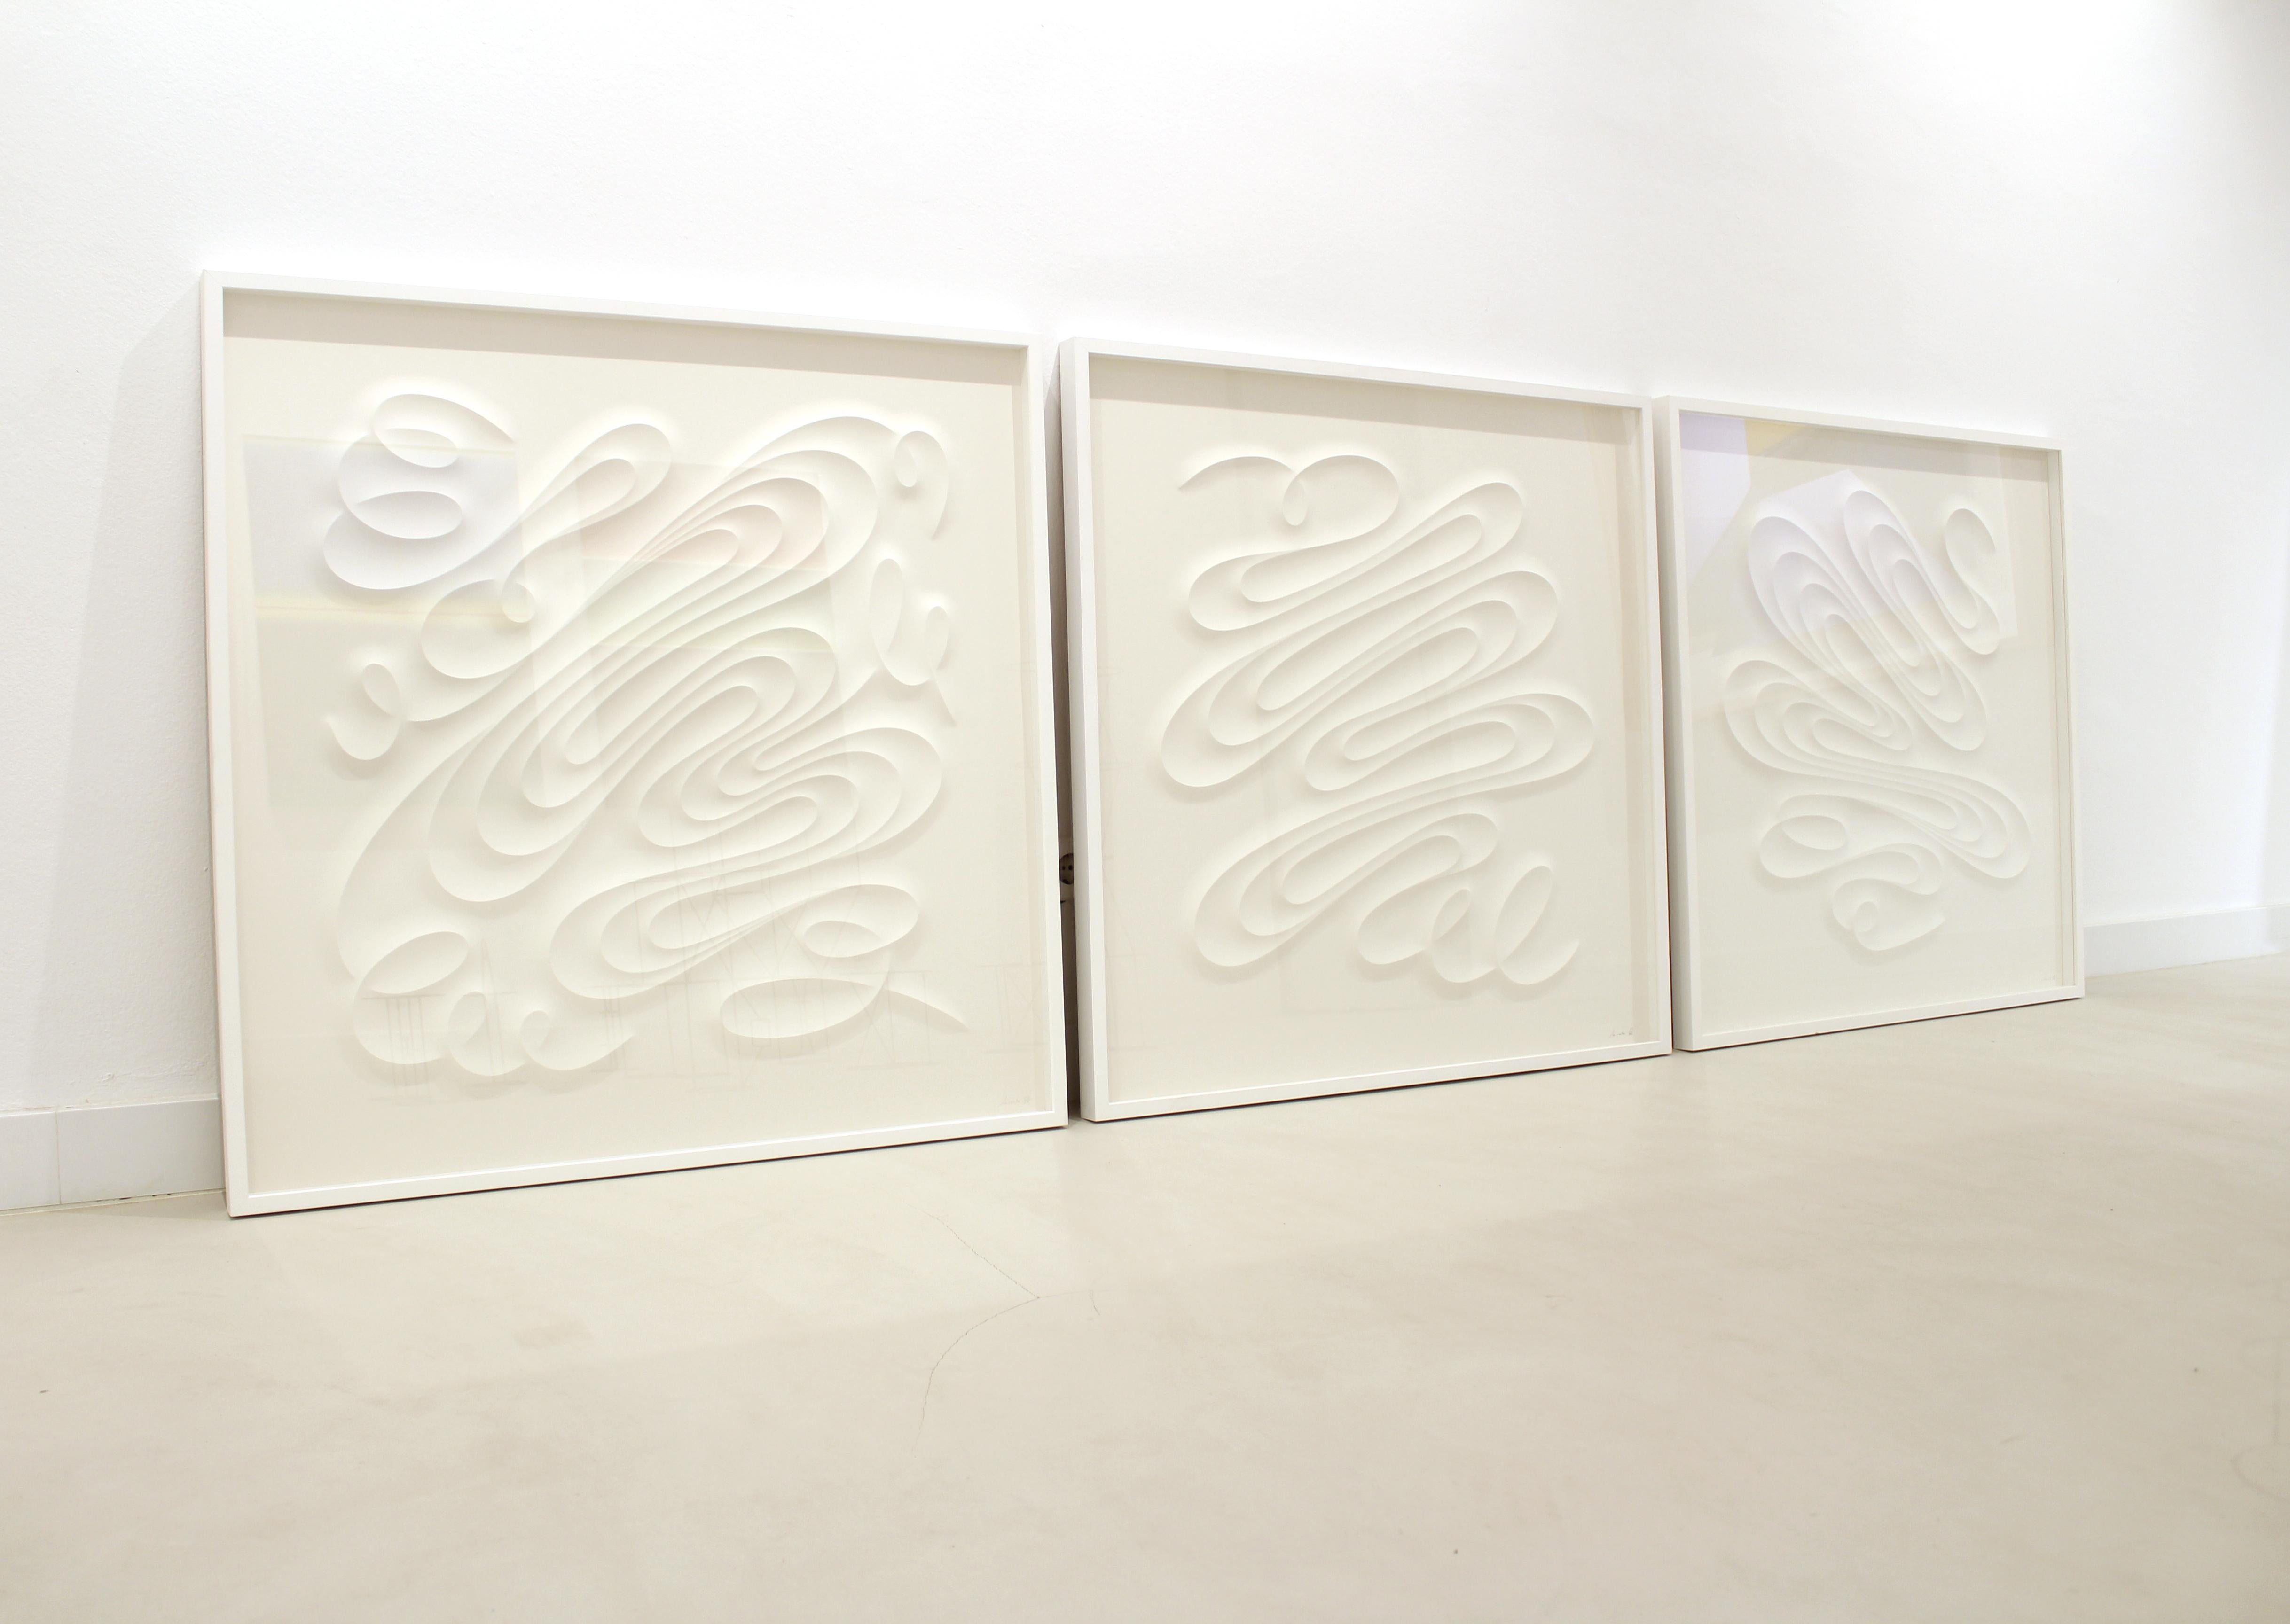 FESCOMX - curvature sculpture embossing on arches paper - white minimalist  - Contemporary Sculpture by Jacinto Moros